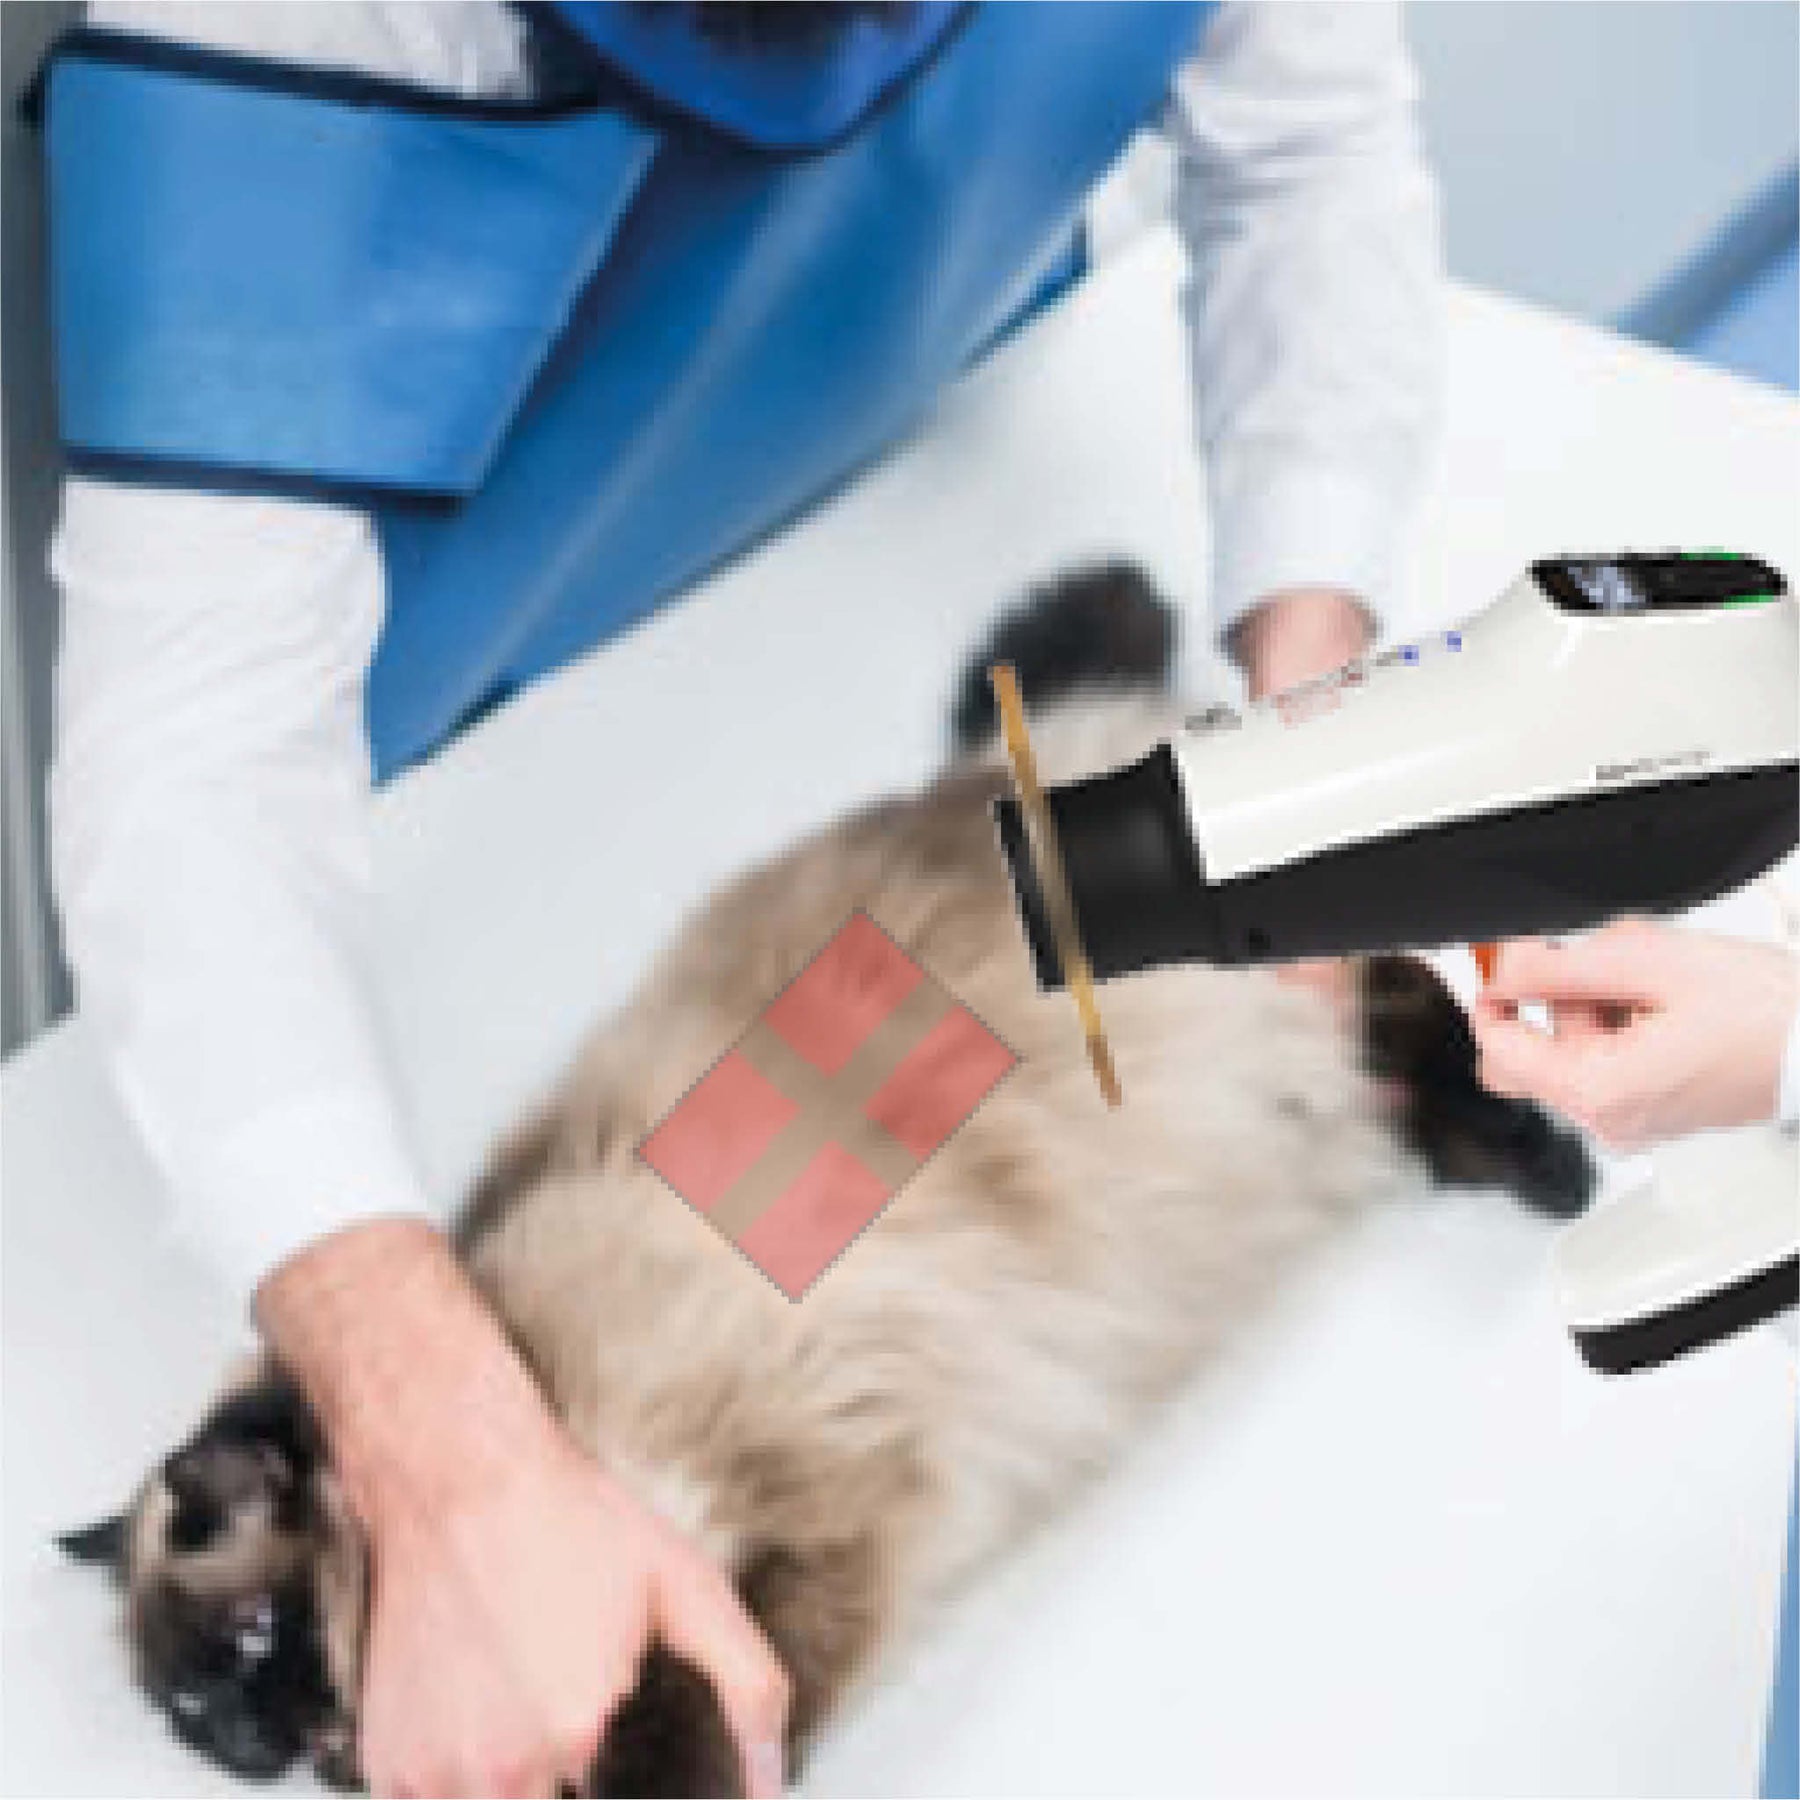 Dexcowin COCOON Handheld Vet X-ray portable unit for animals of all sizes